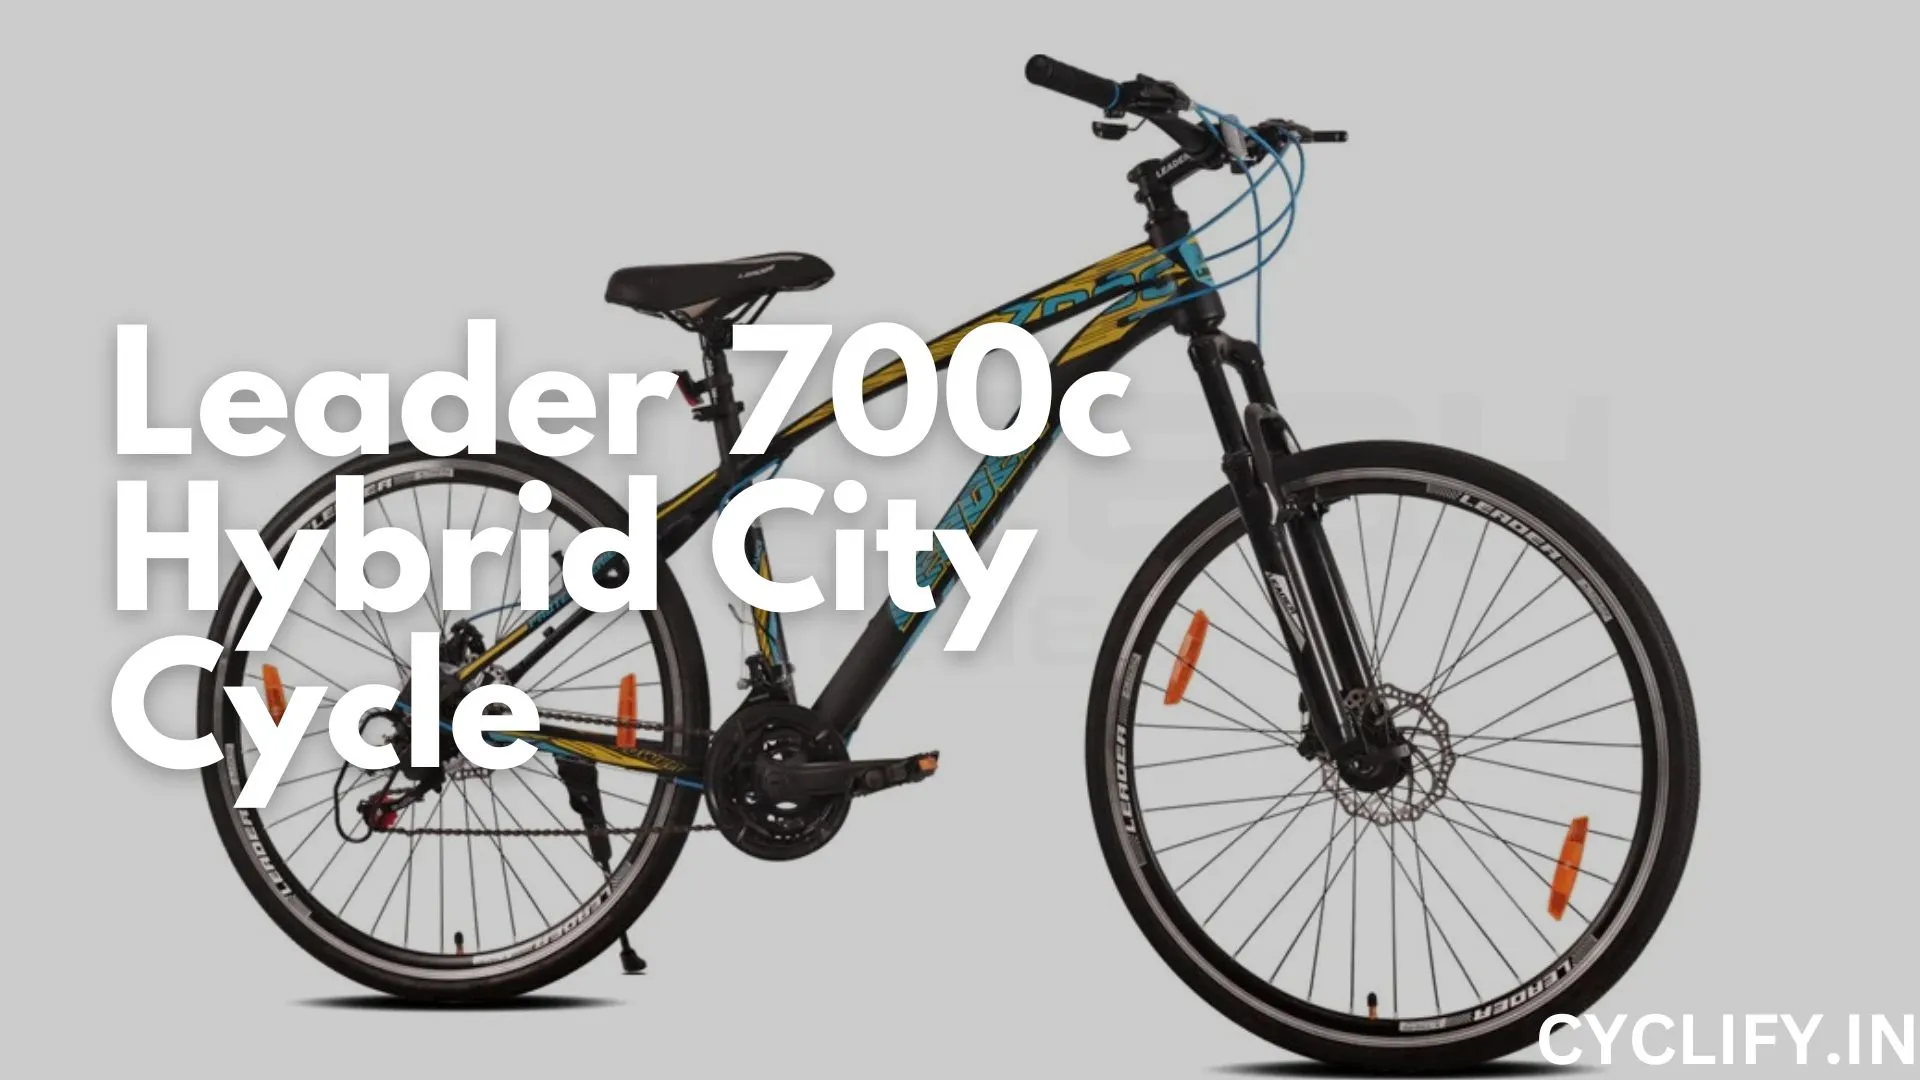 Leader 700c Hybrid City Cycle Review